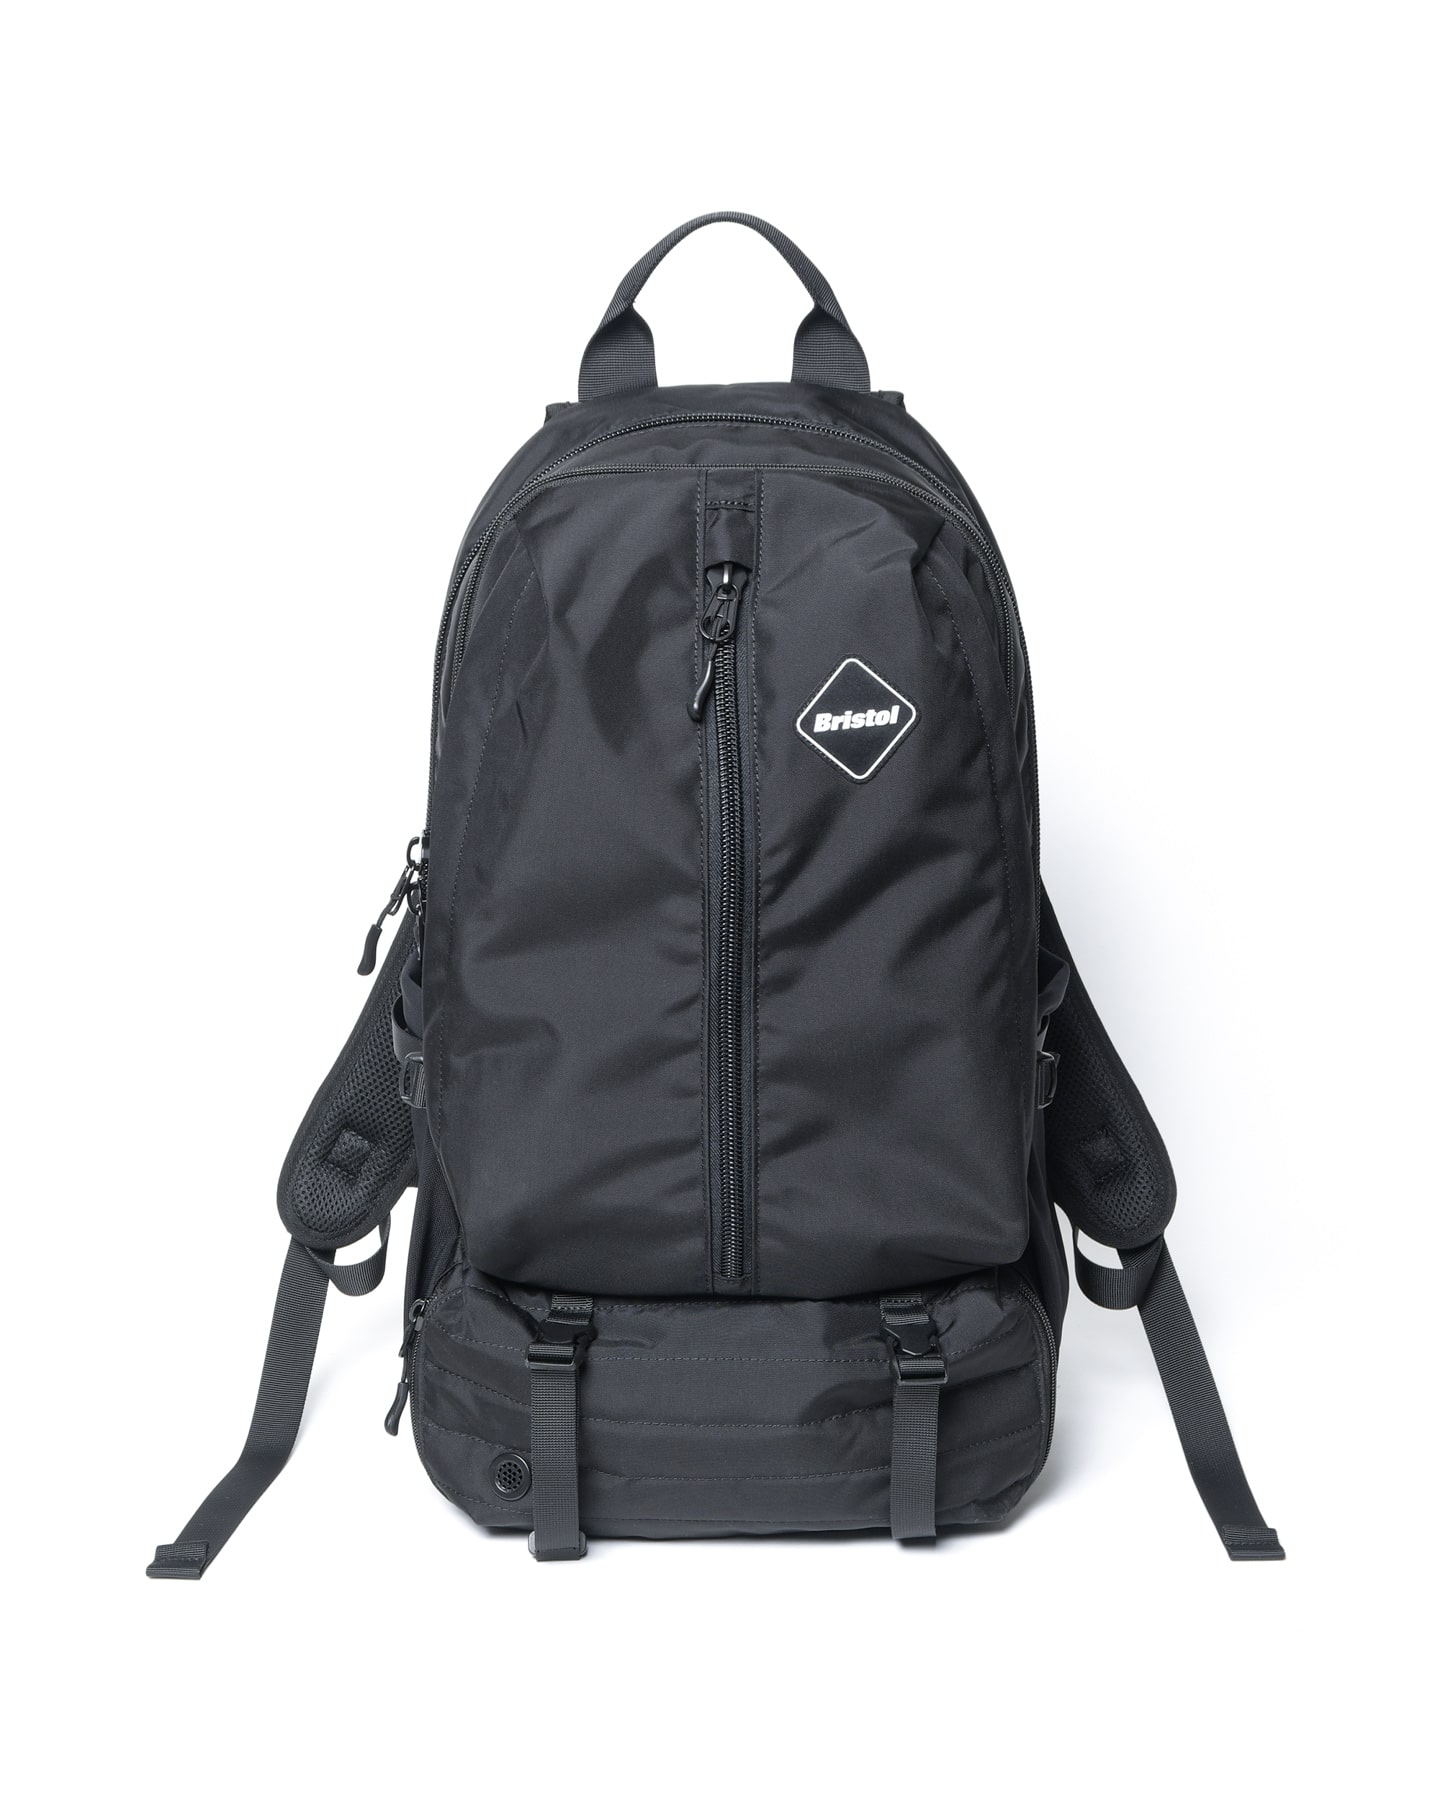 TOUFCRB TOUR BACKPACK　バックパック